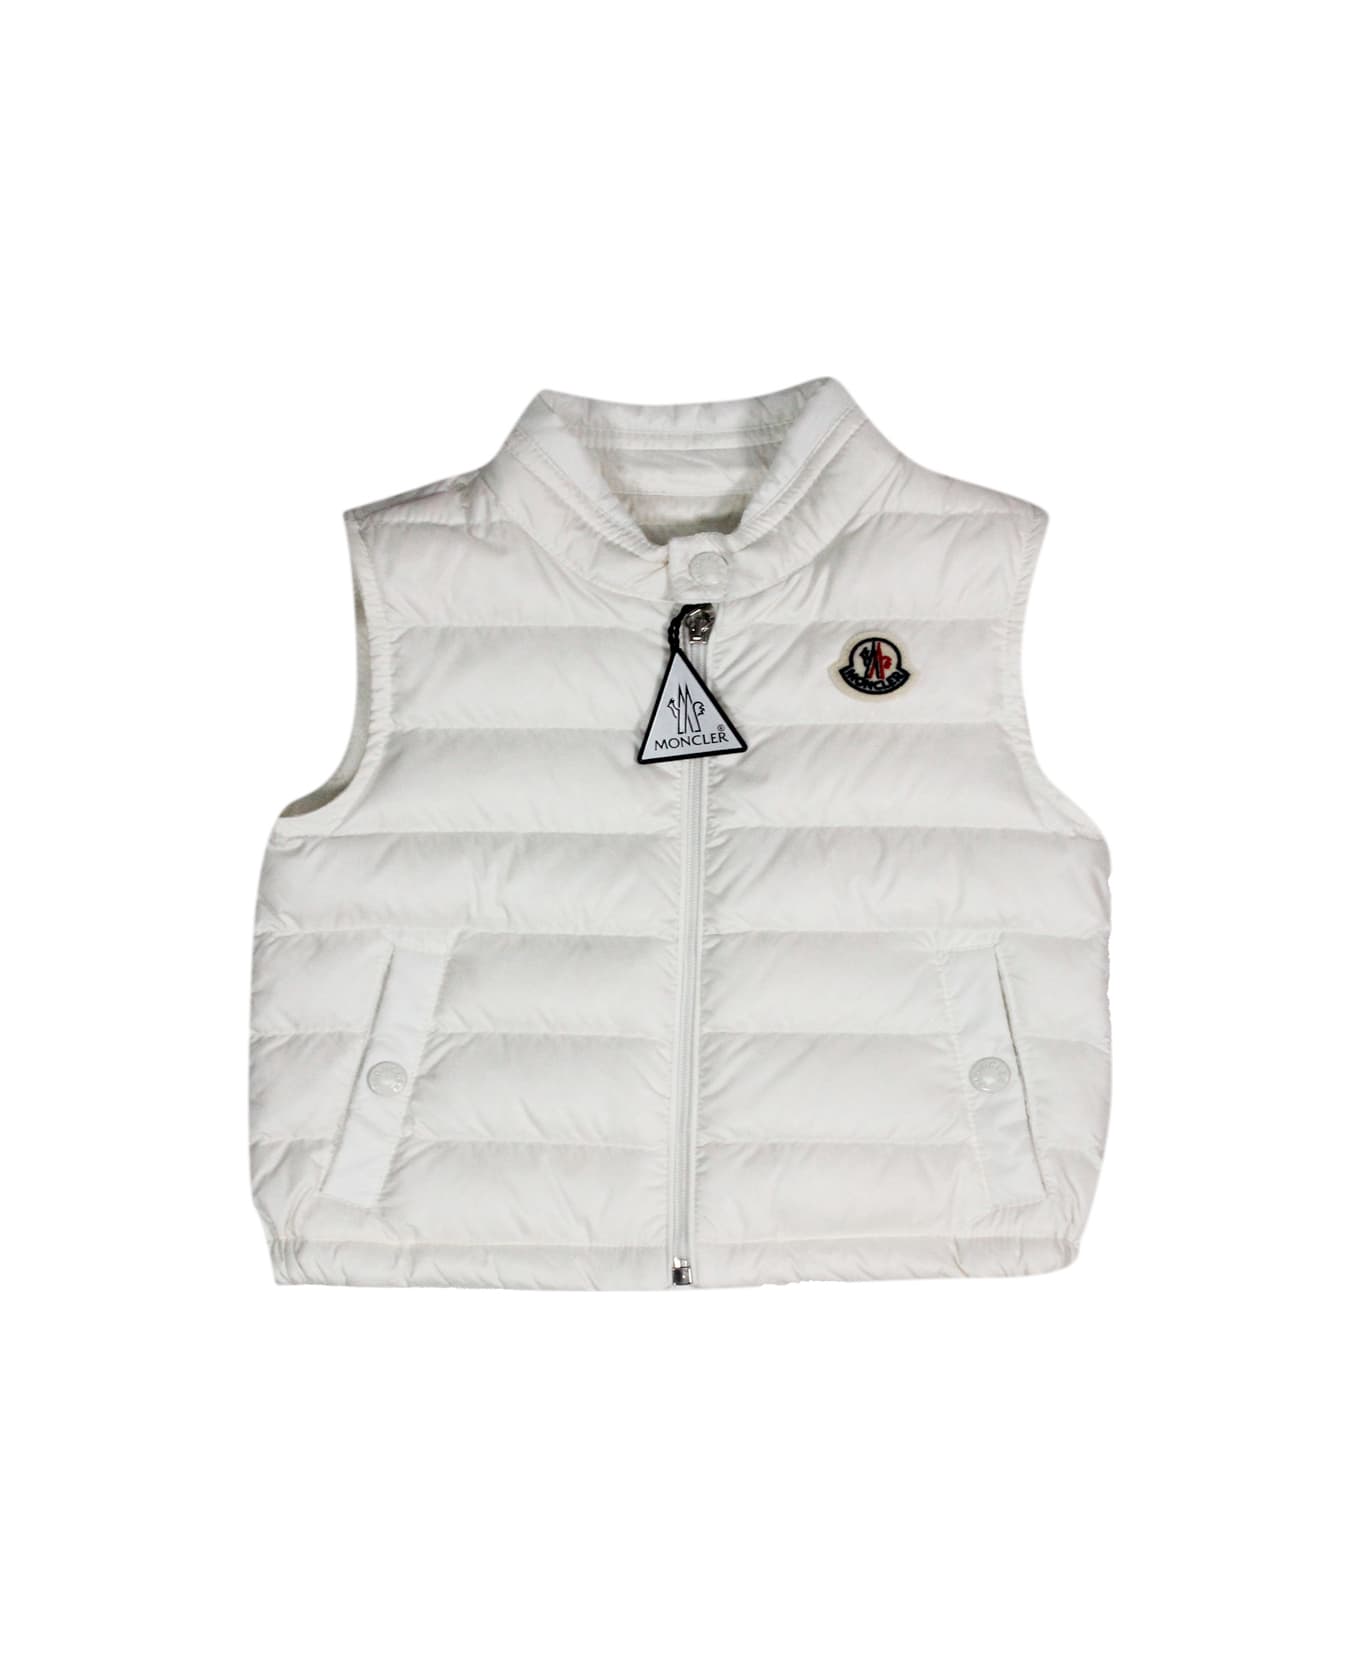 Moncler New Amaury Sleeveless Lightweight Down Jacket With Front Zip Closure And Logo - White